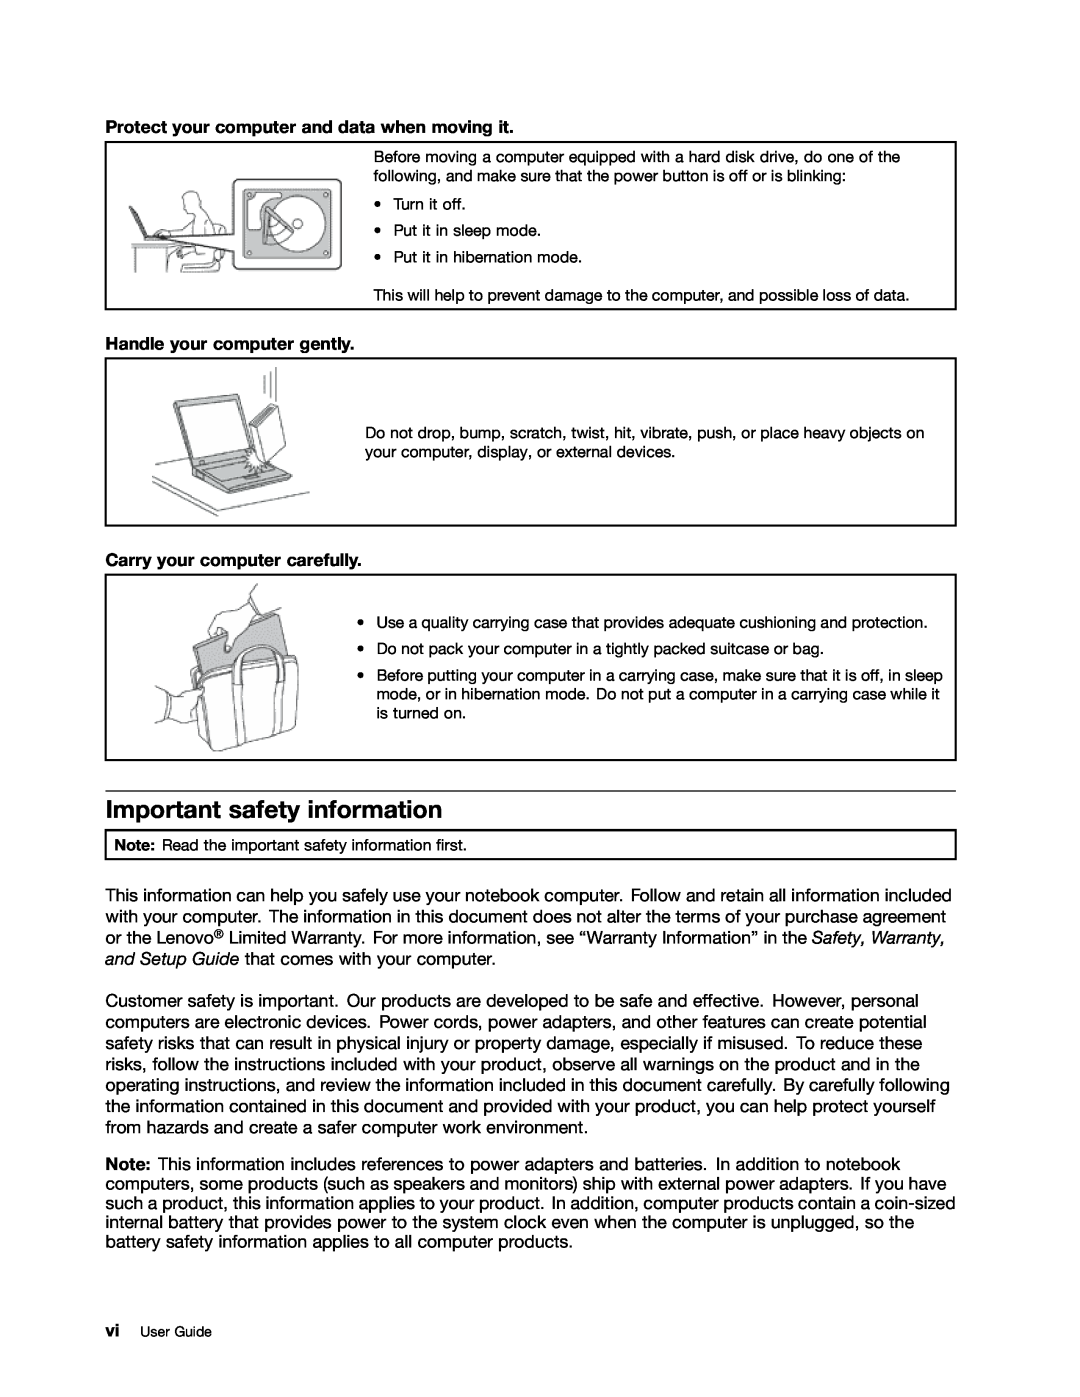 Lenovo X131E Important safety information, Protect your computer and data when moving it, Handle your computer gently 